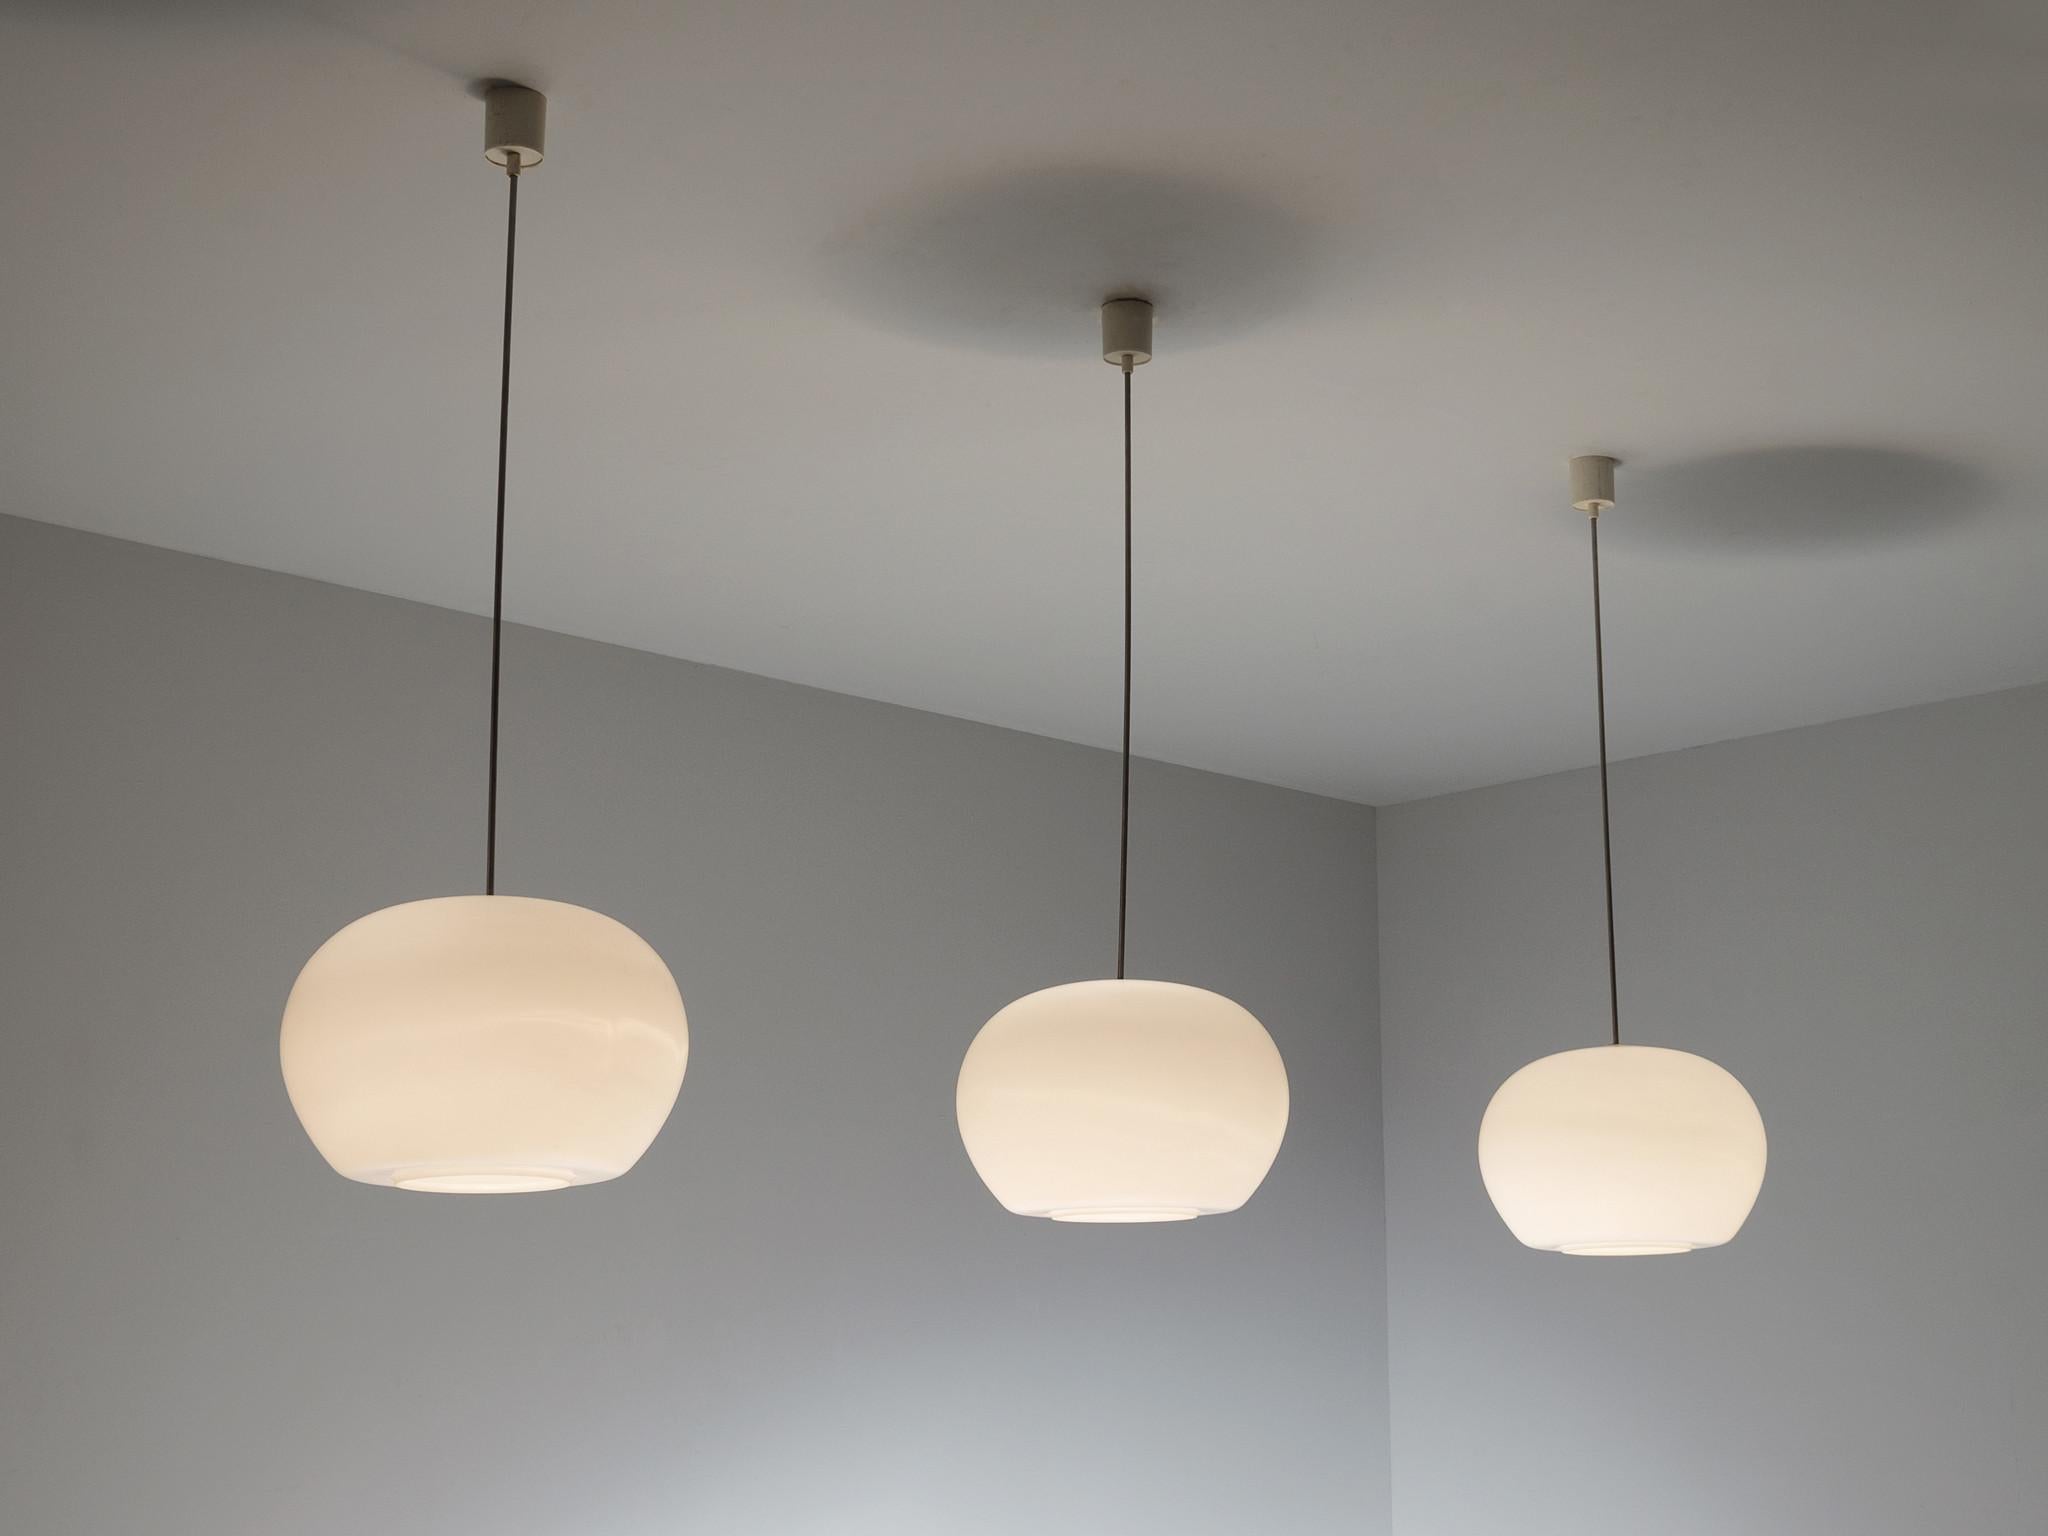 Pendants in metal and opaline glass, Europe, 1970s.

Pendants made in Europe in the 1970s. These lights show a serene appearance because of their opal glass shades. This design is very simplistic and sober, yet these lights create a very warm and